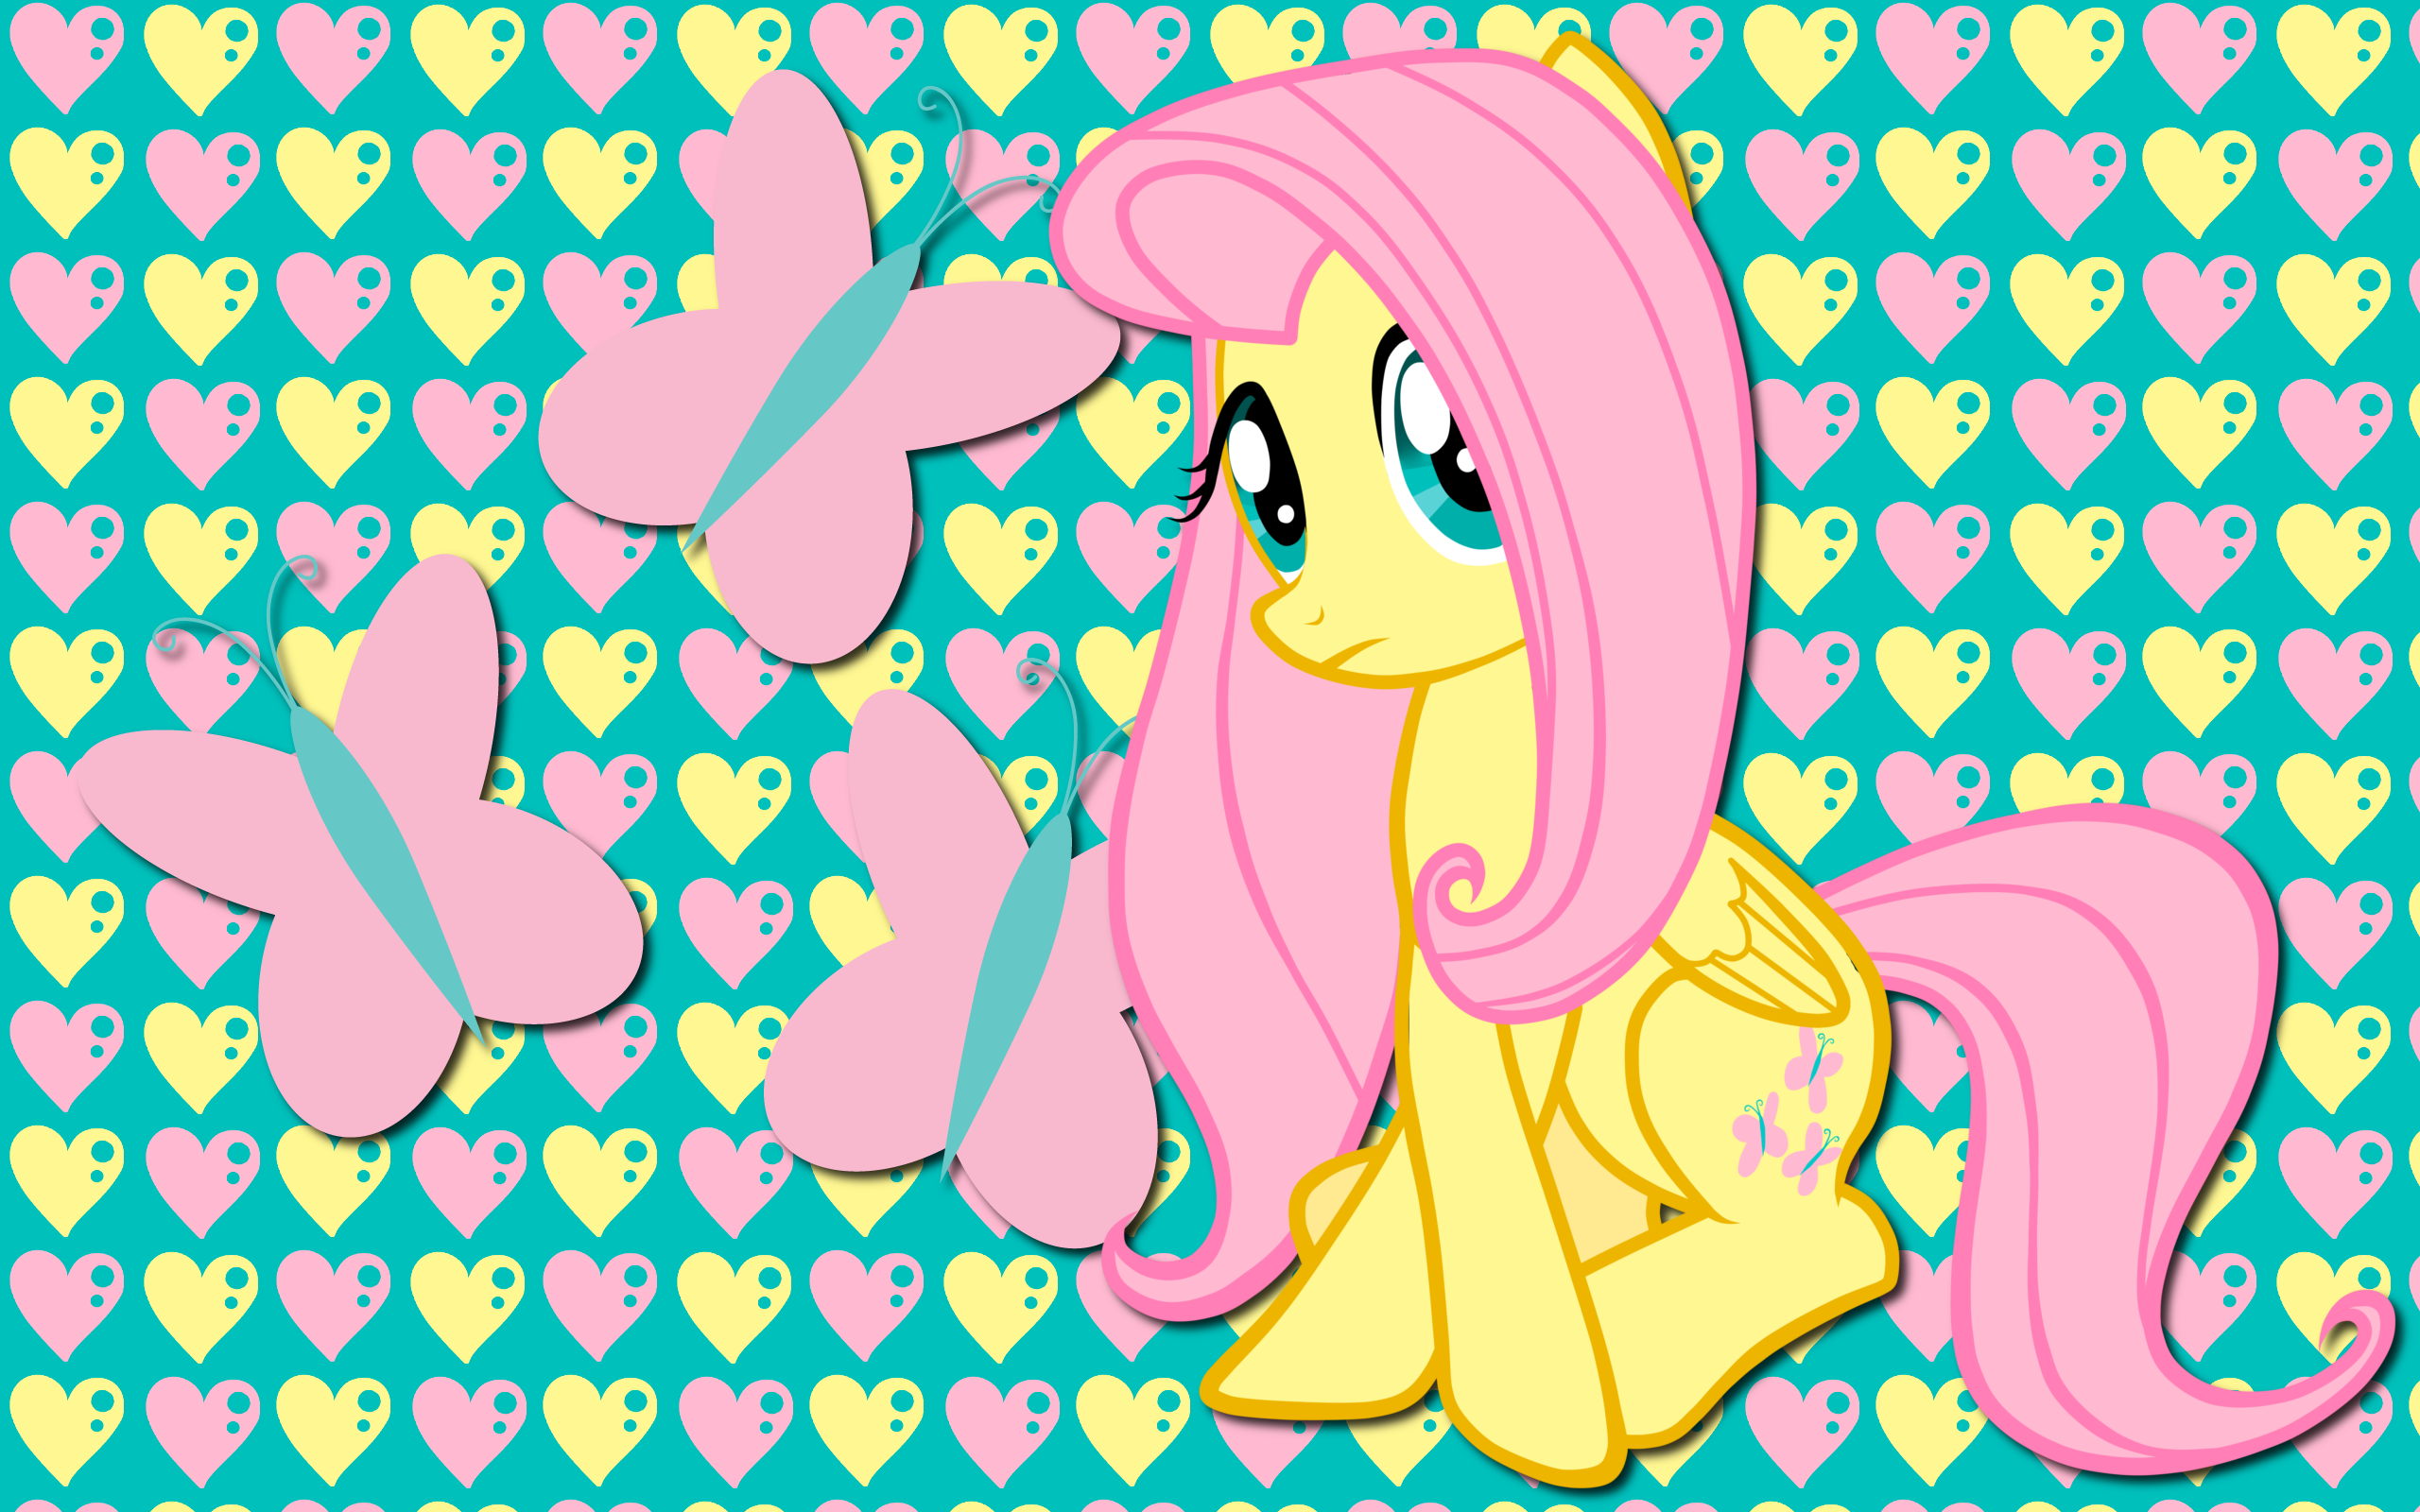 Fluttershy WP 12 by AliceHumanSacrifice0, fluttershy7 and ooklah